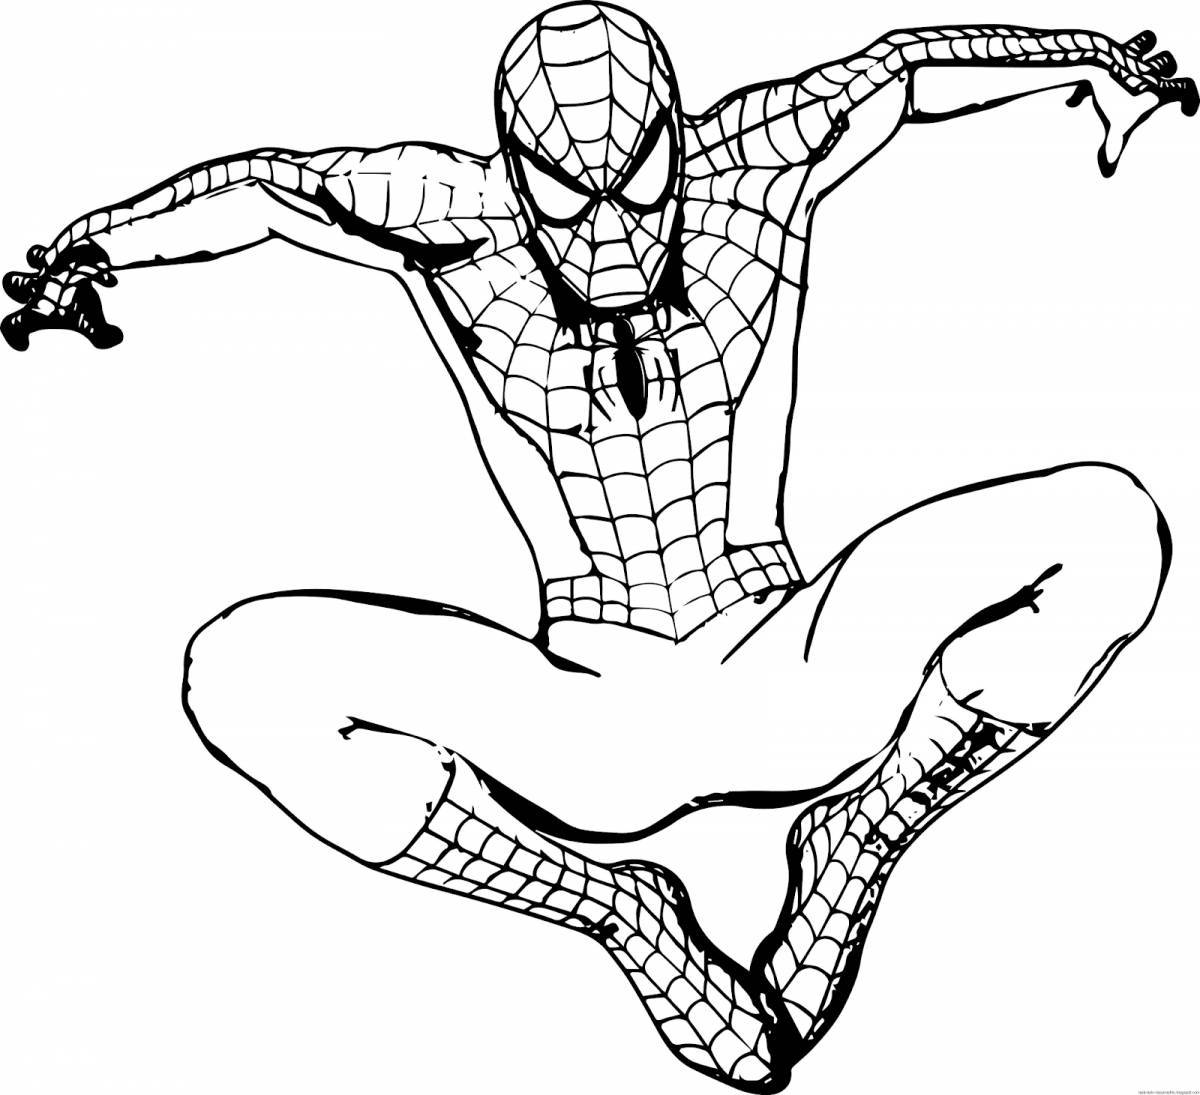 Spider man in good quality #4